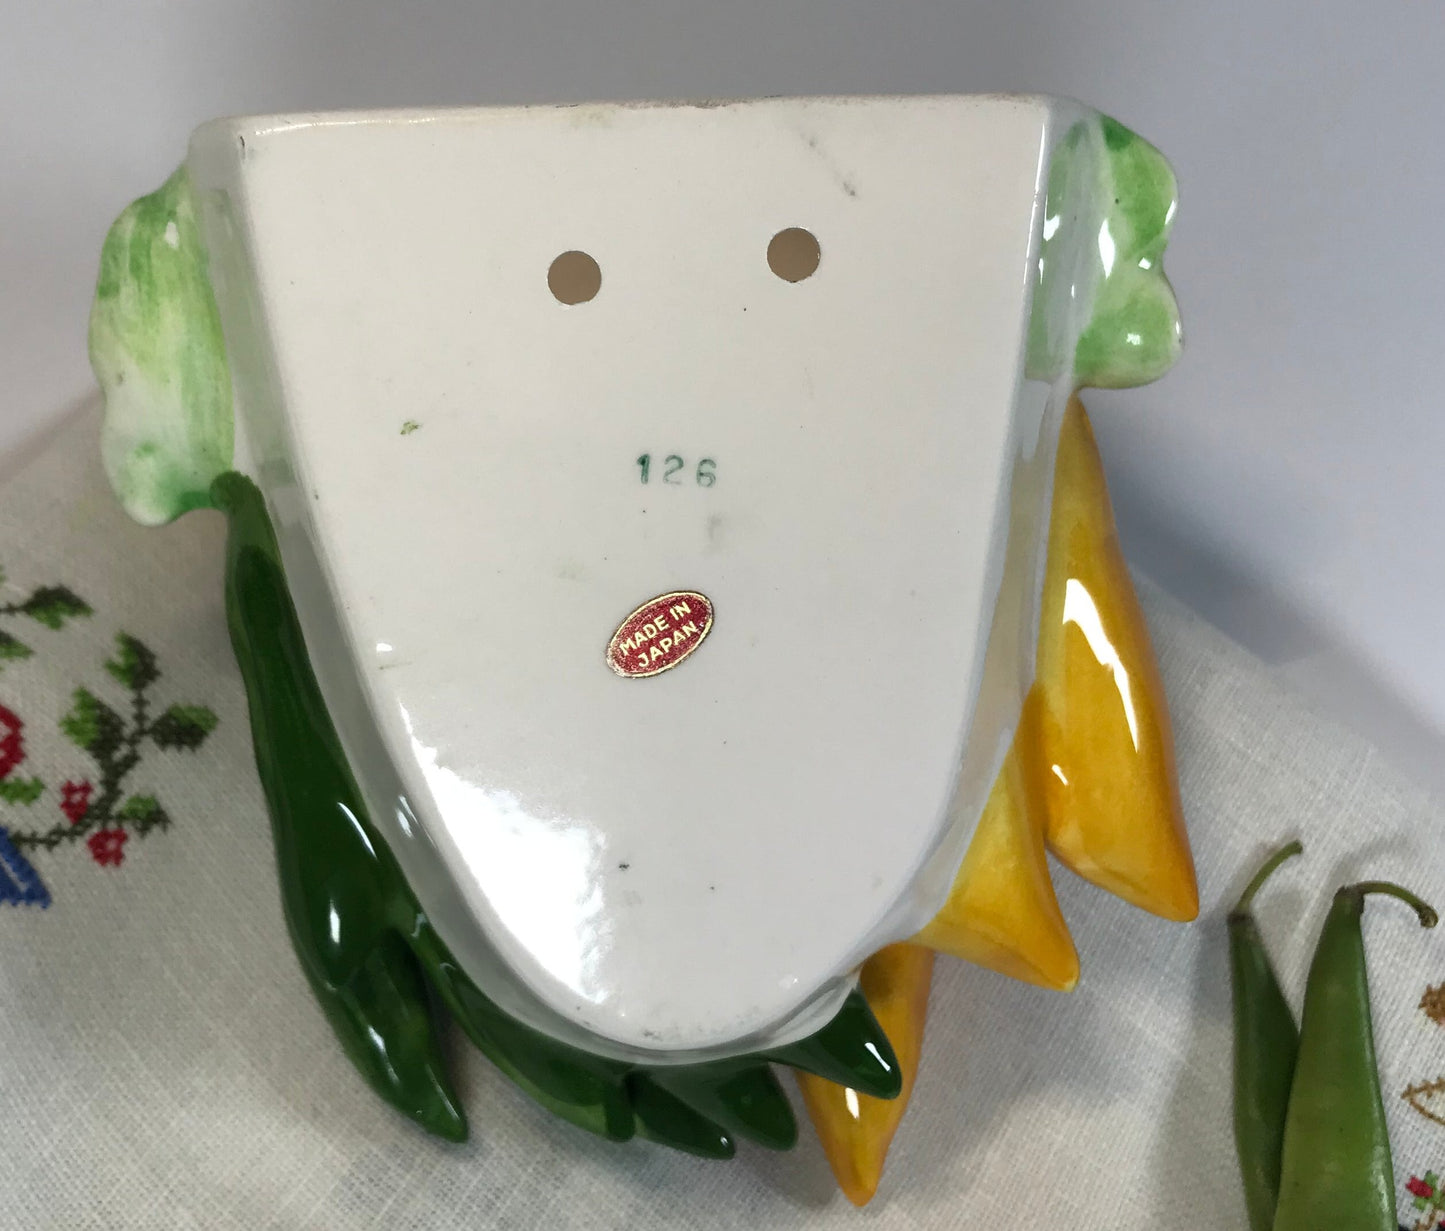 Carrot and Green Bean Mid-century Ceramic Kitchen Wall Pocket 1950s